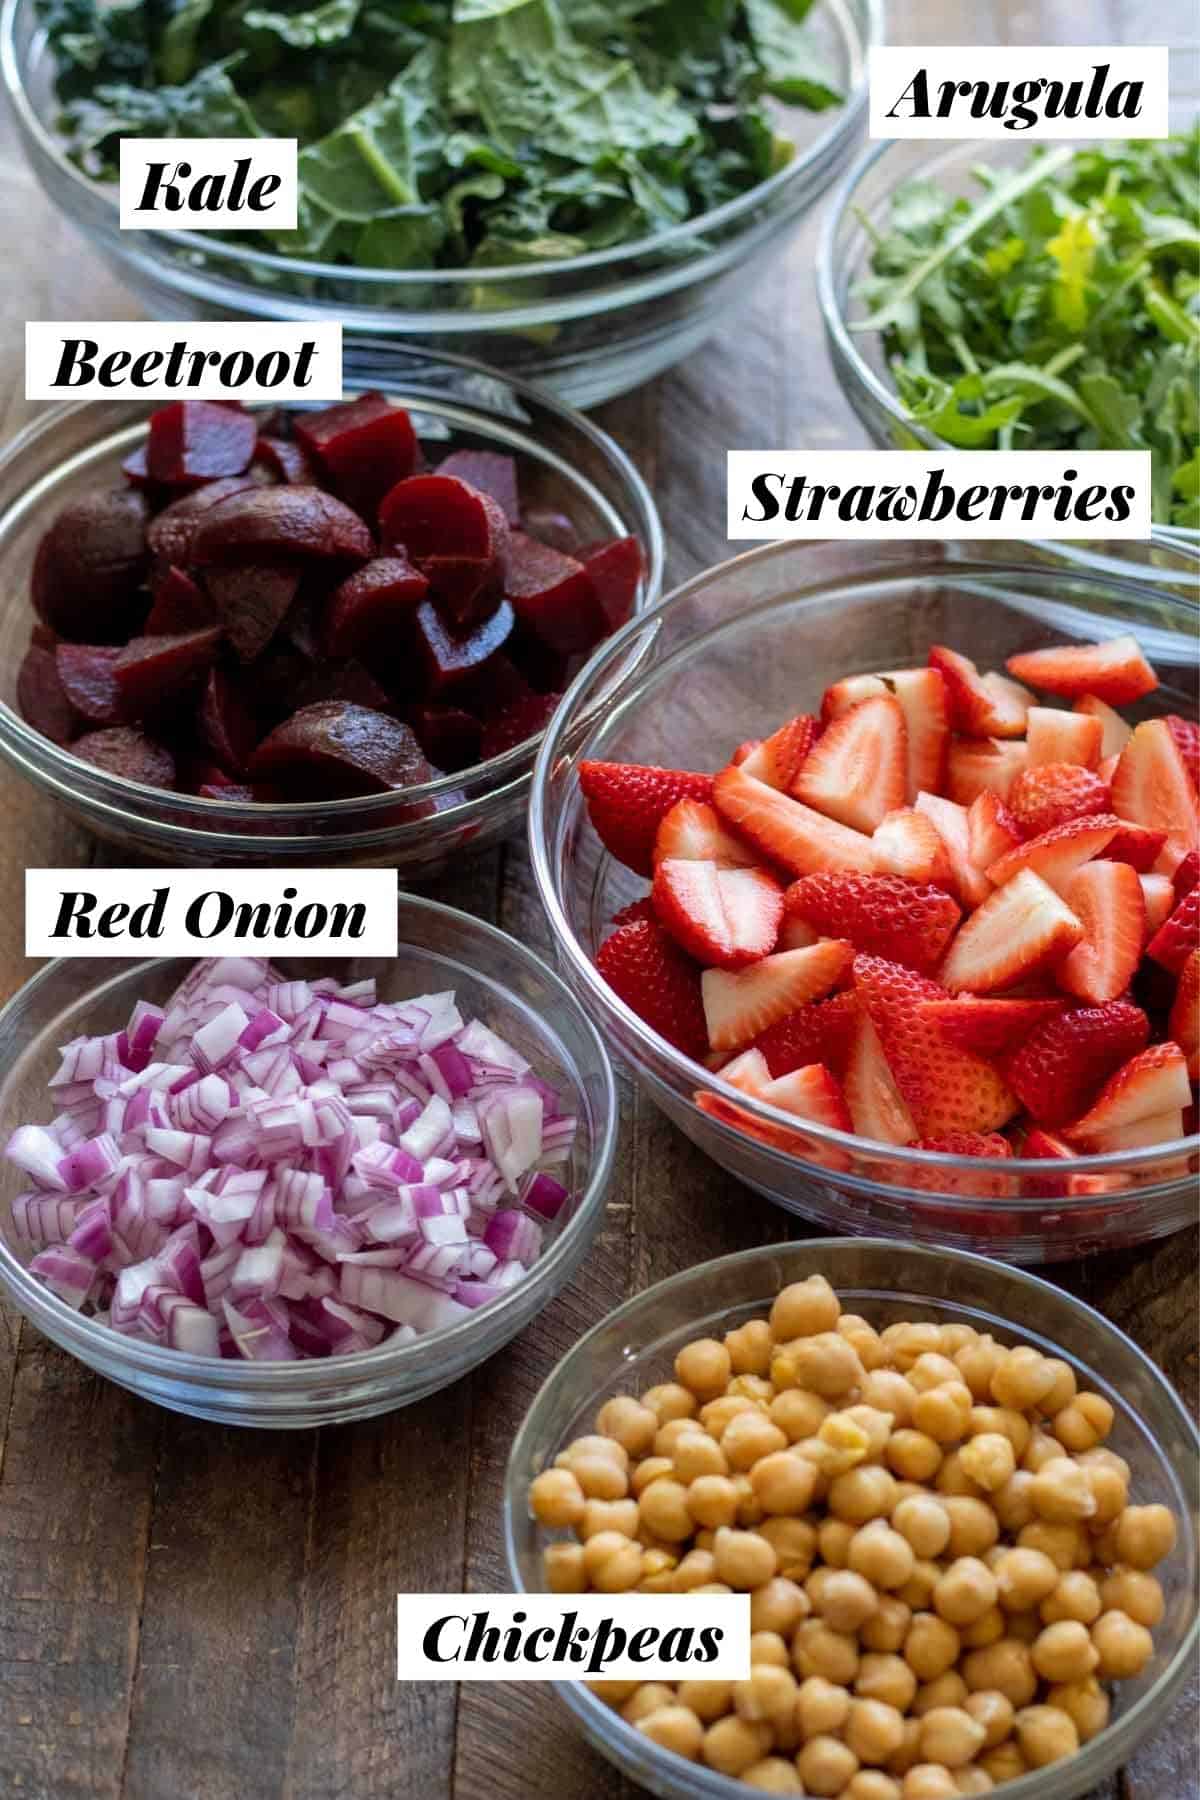 Main salad ingredients measured out into individual glass bowls and labeled.